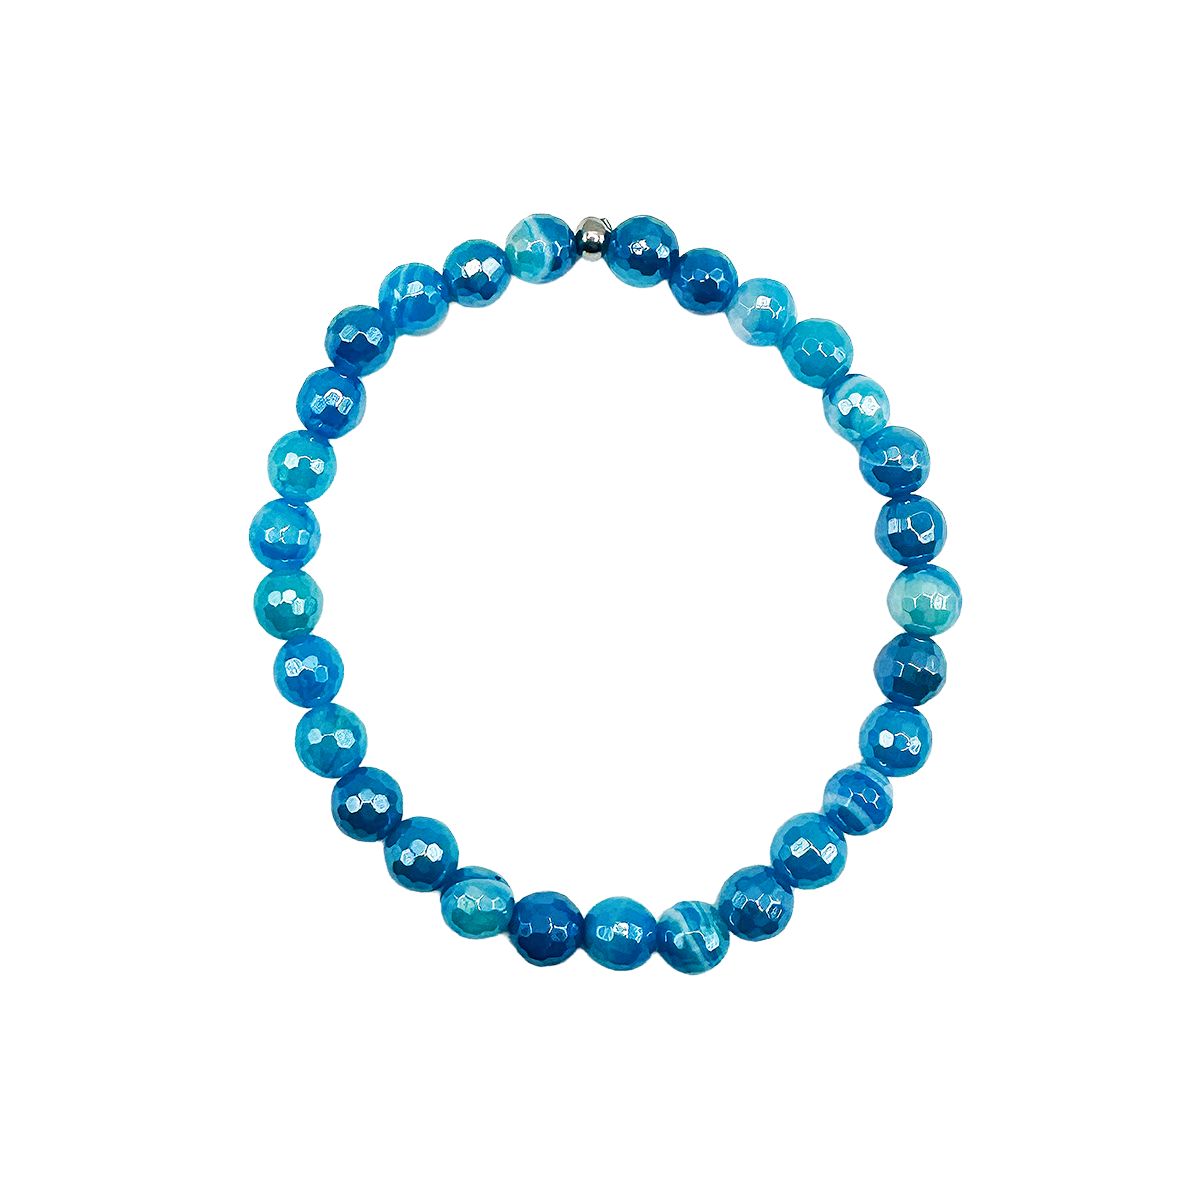 Featherly Blue Banded Agate Faceted Mini Stacker Beaded Gemstone Crystal Bracelet